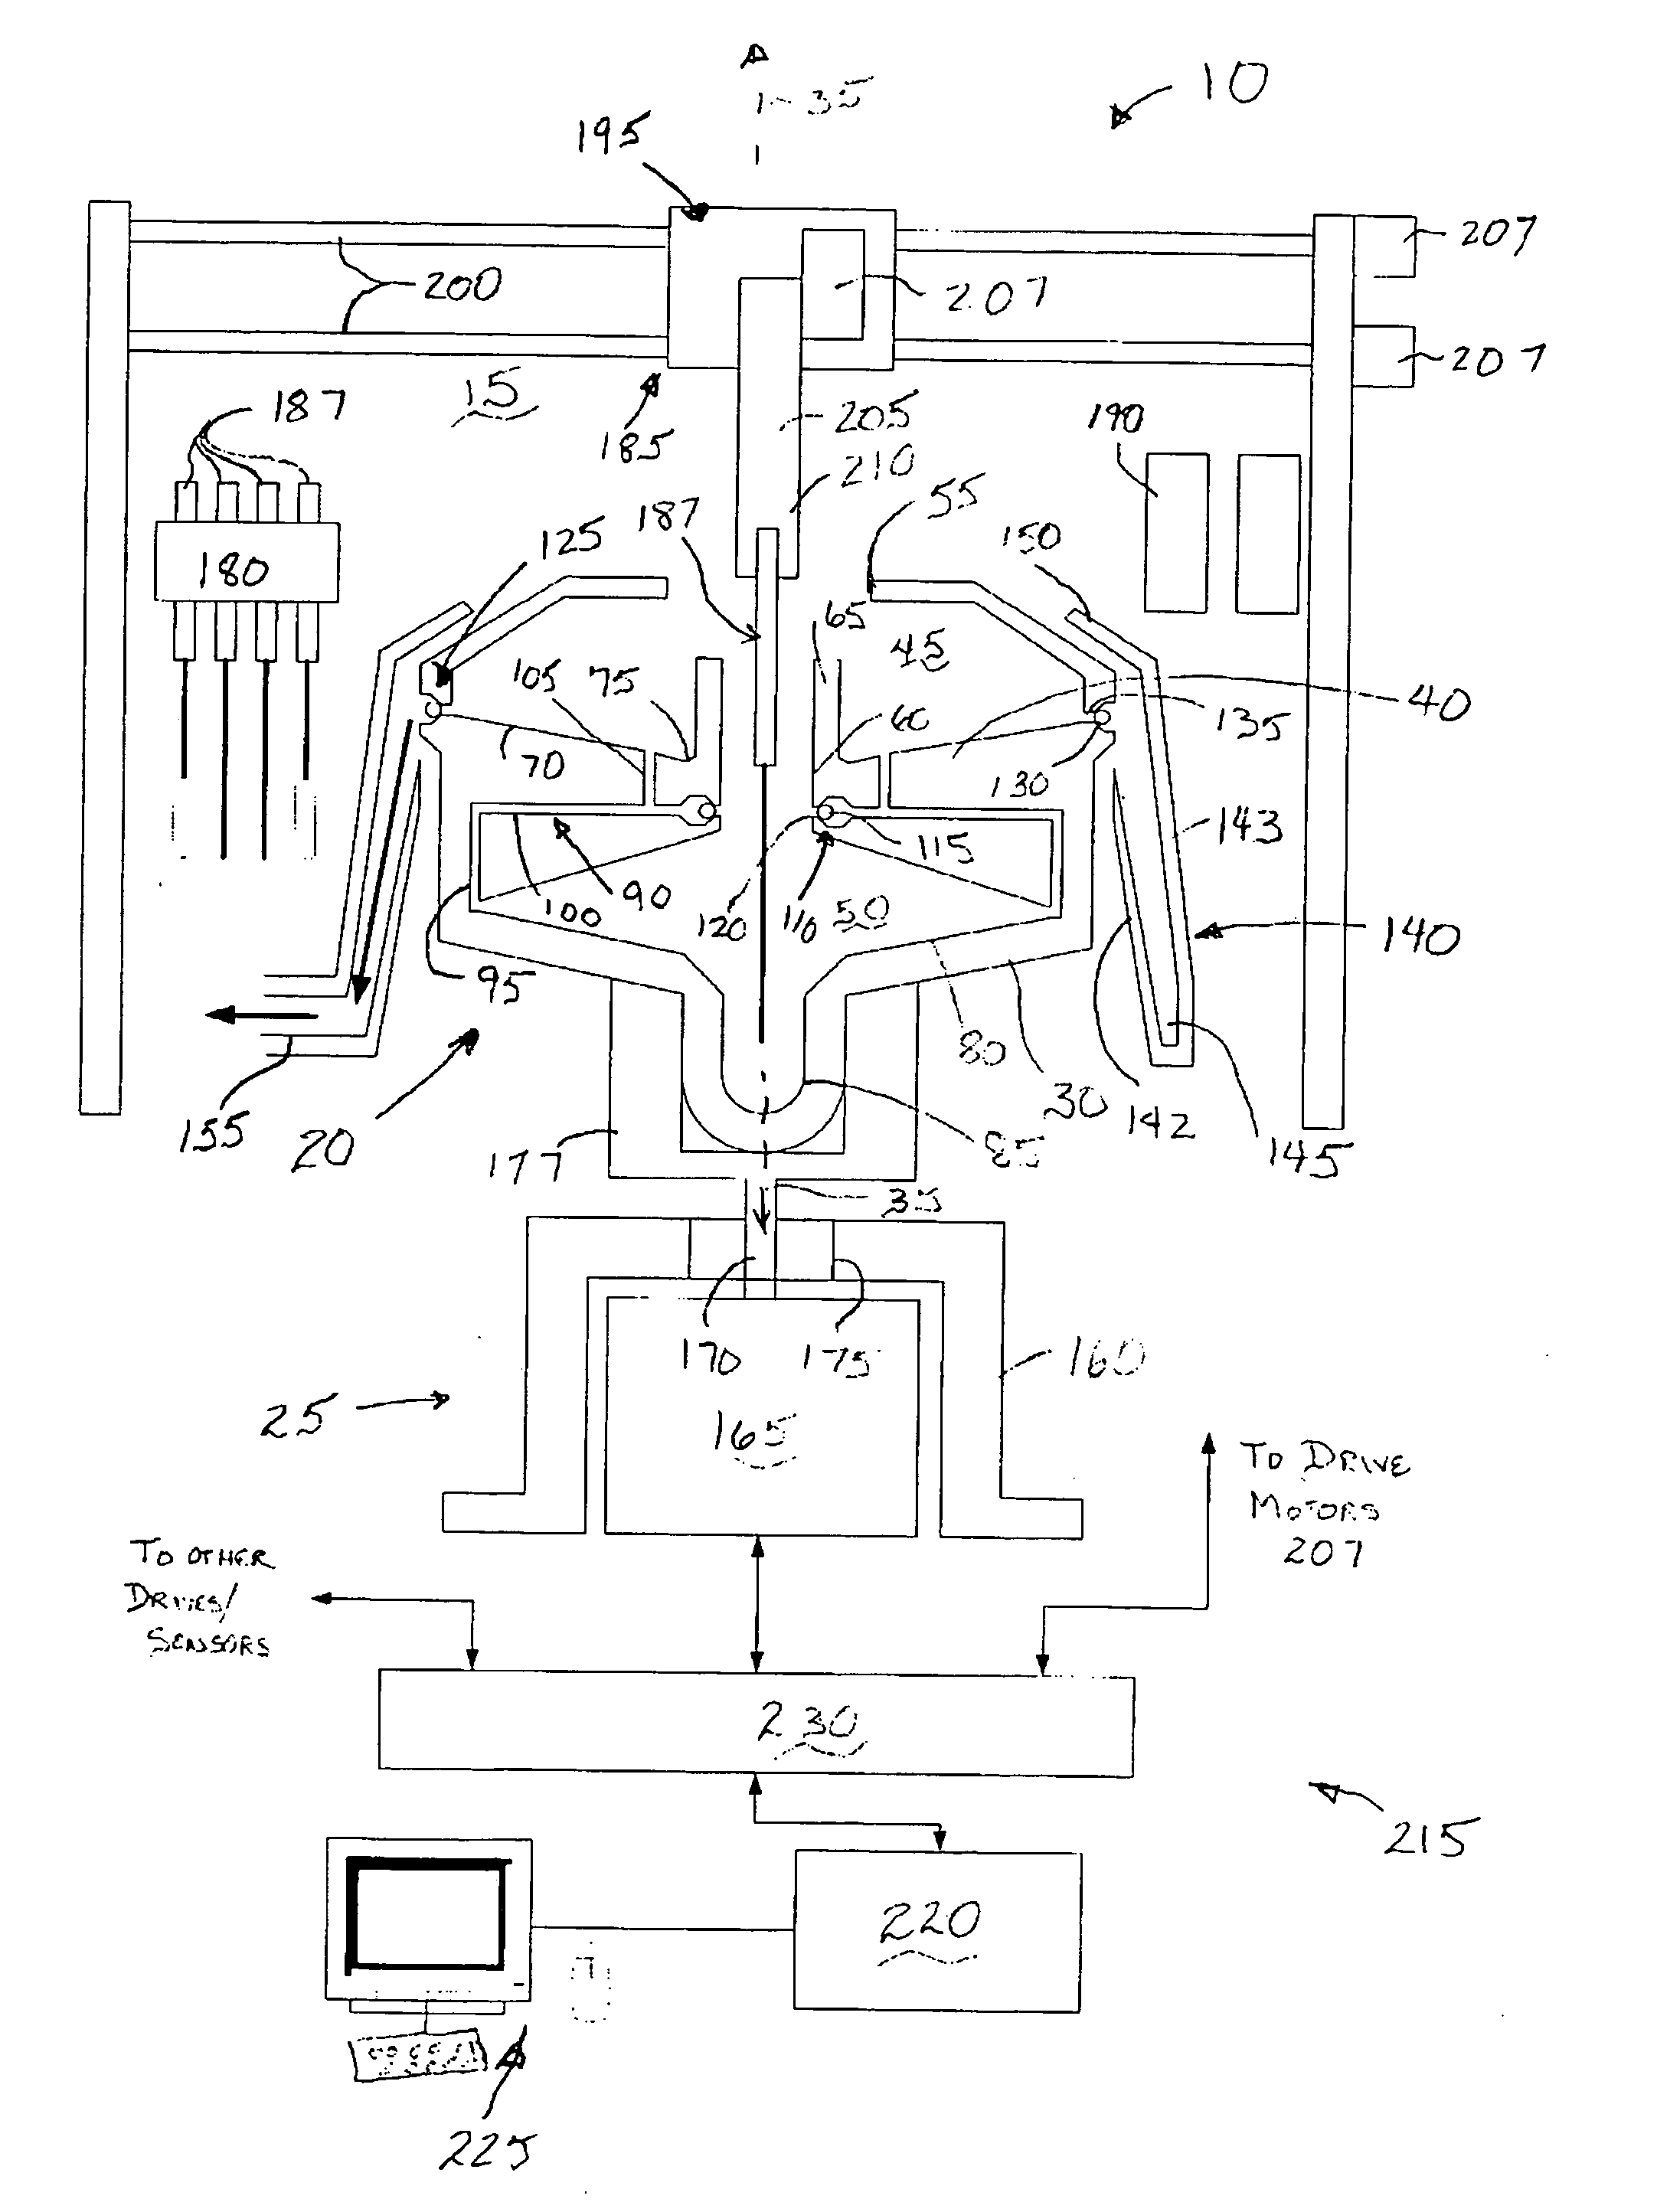 Sample preparation system for a laboratory apparatus